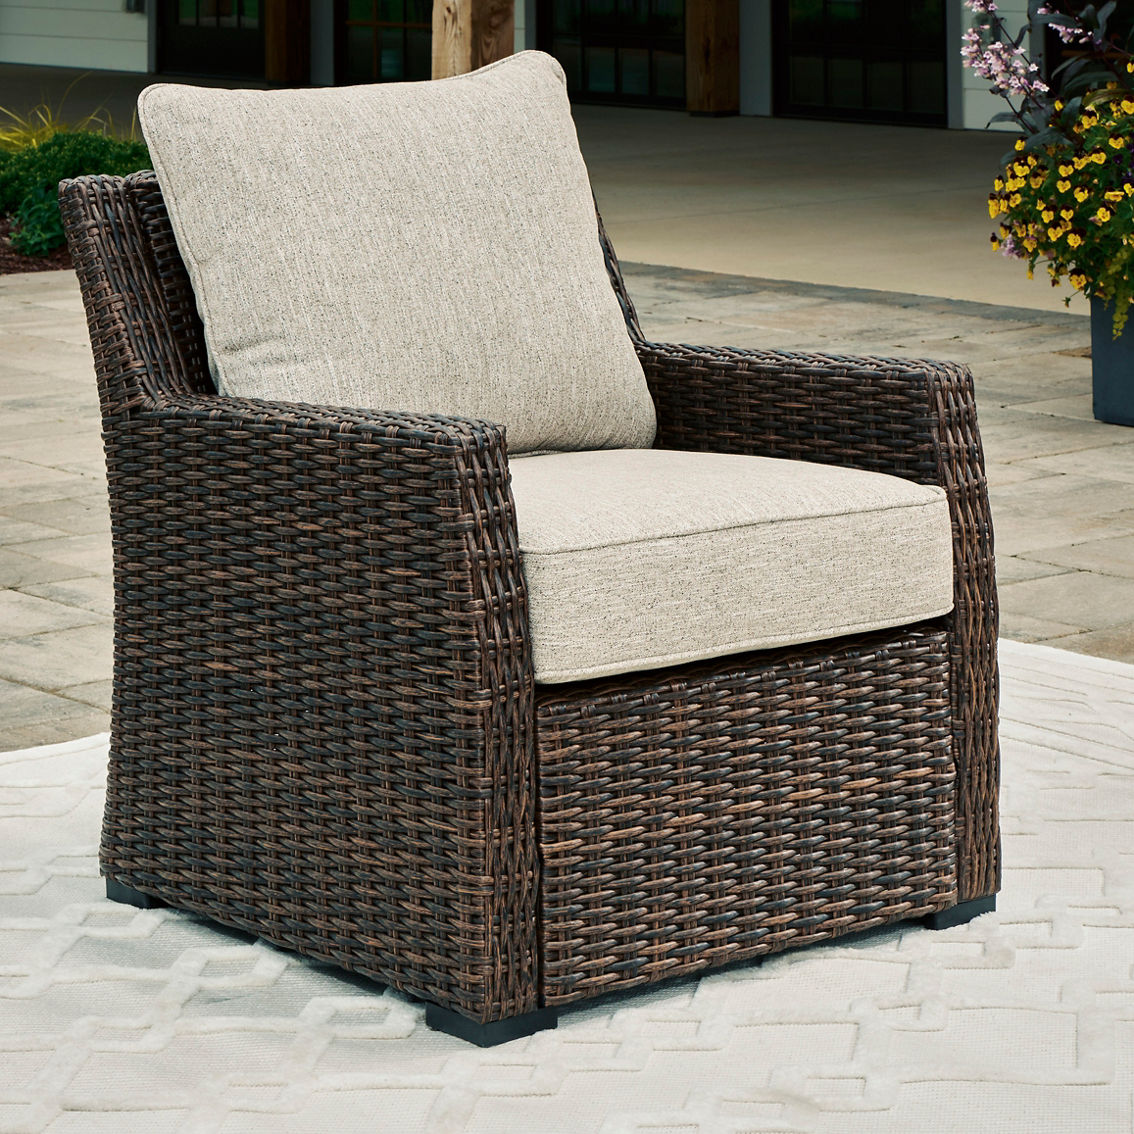 Signature Design by Ashley Brook Ranch 3 pc. Outdoor Sectional Set - Image 4 of 5